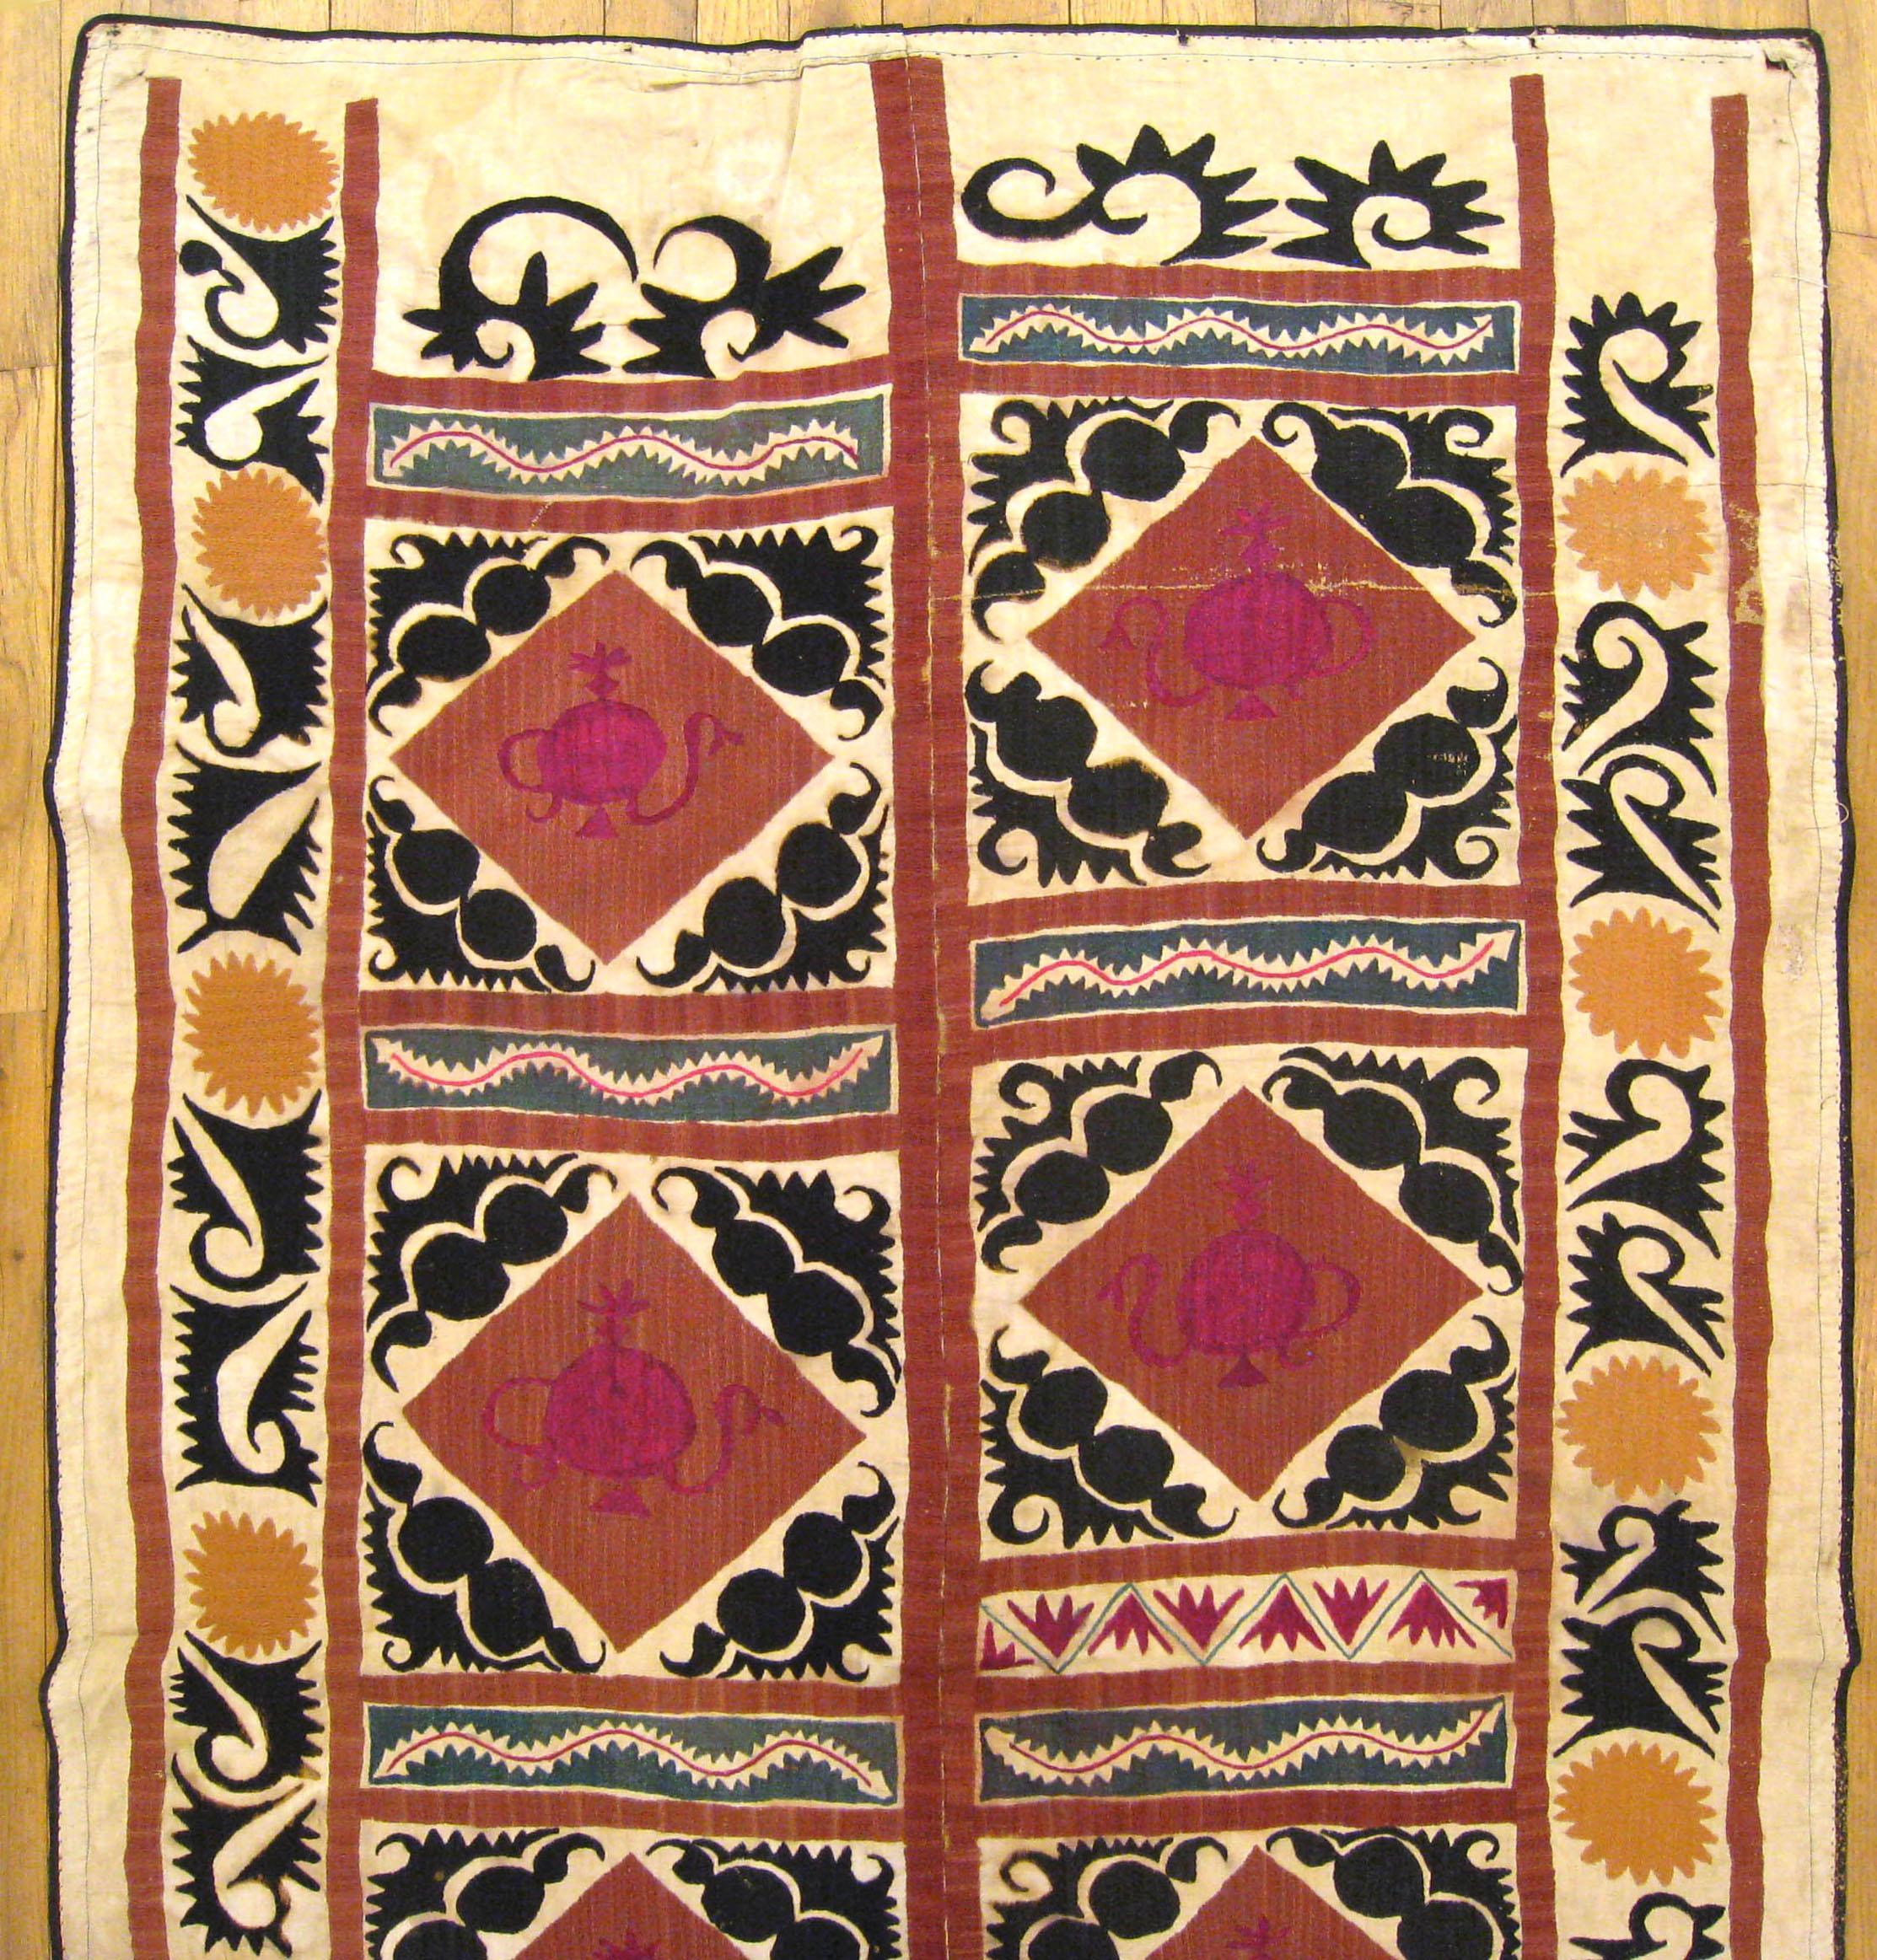 Hand-Woven Antique Decorative Suzani Textile, Repeat Design, Wall Hanging & Floor Covering For Sale